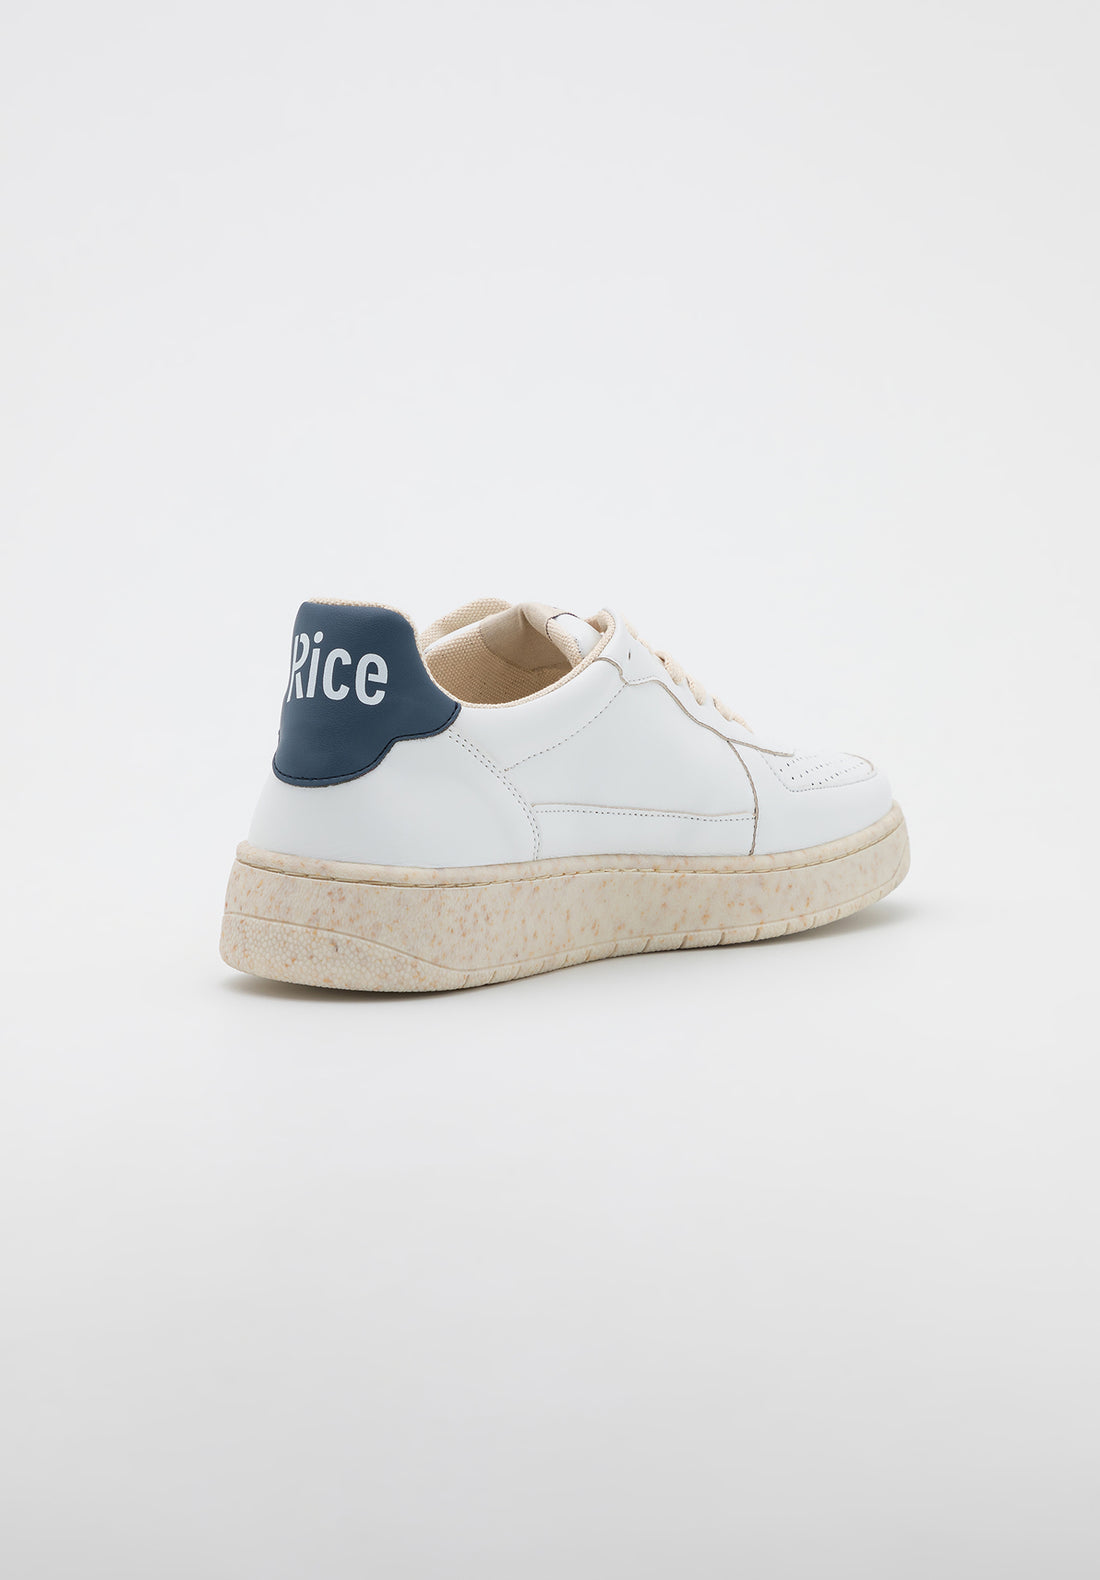 Rice Shoes - Vegan, Recycling and made in Spain - Onlineshop